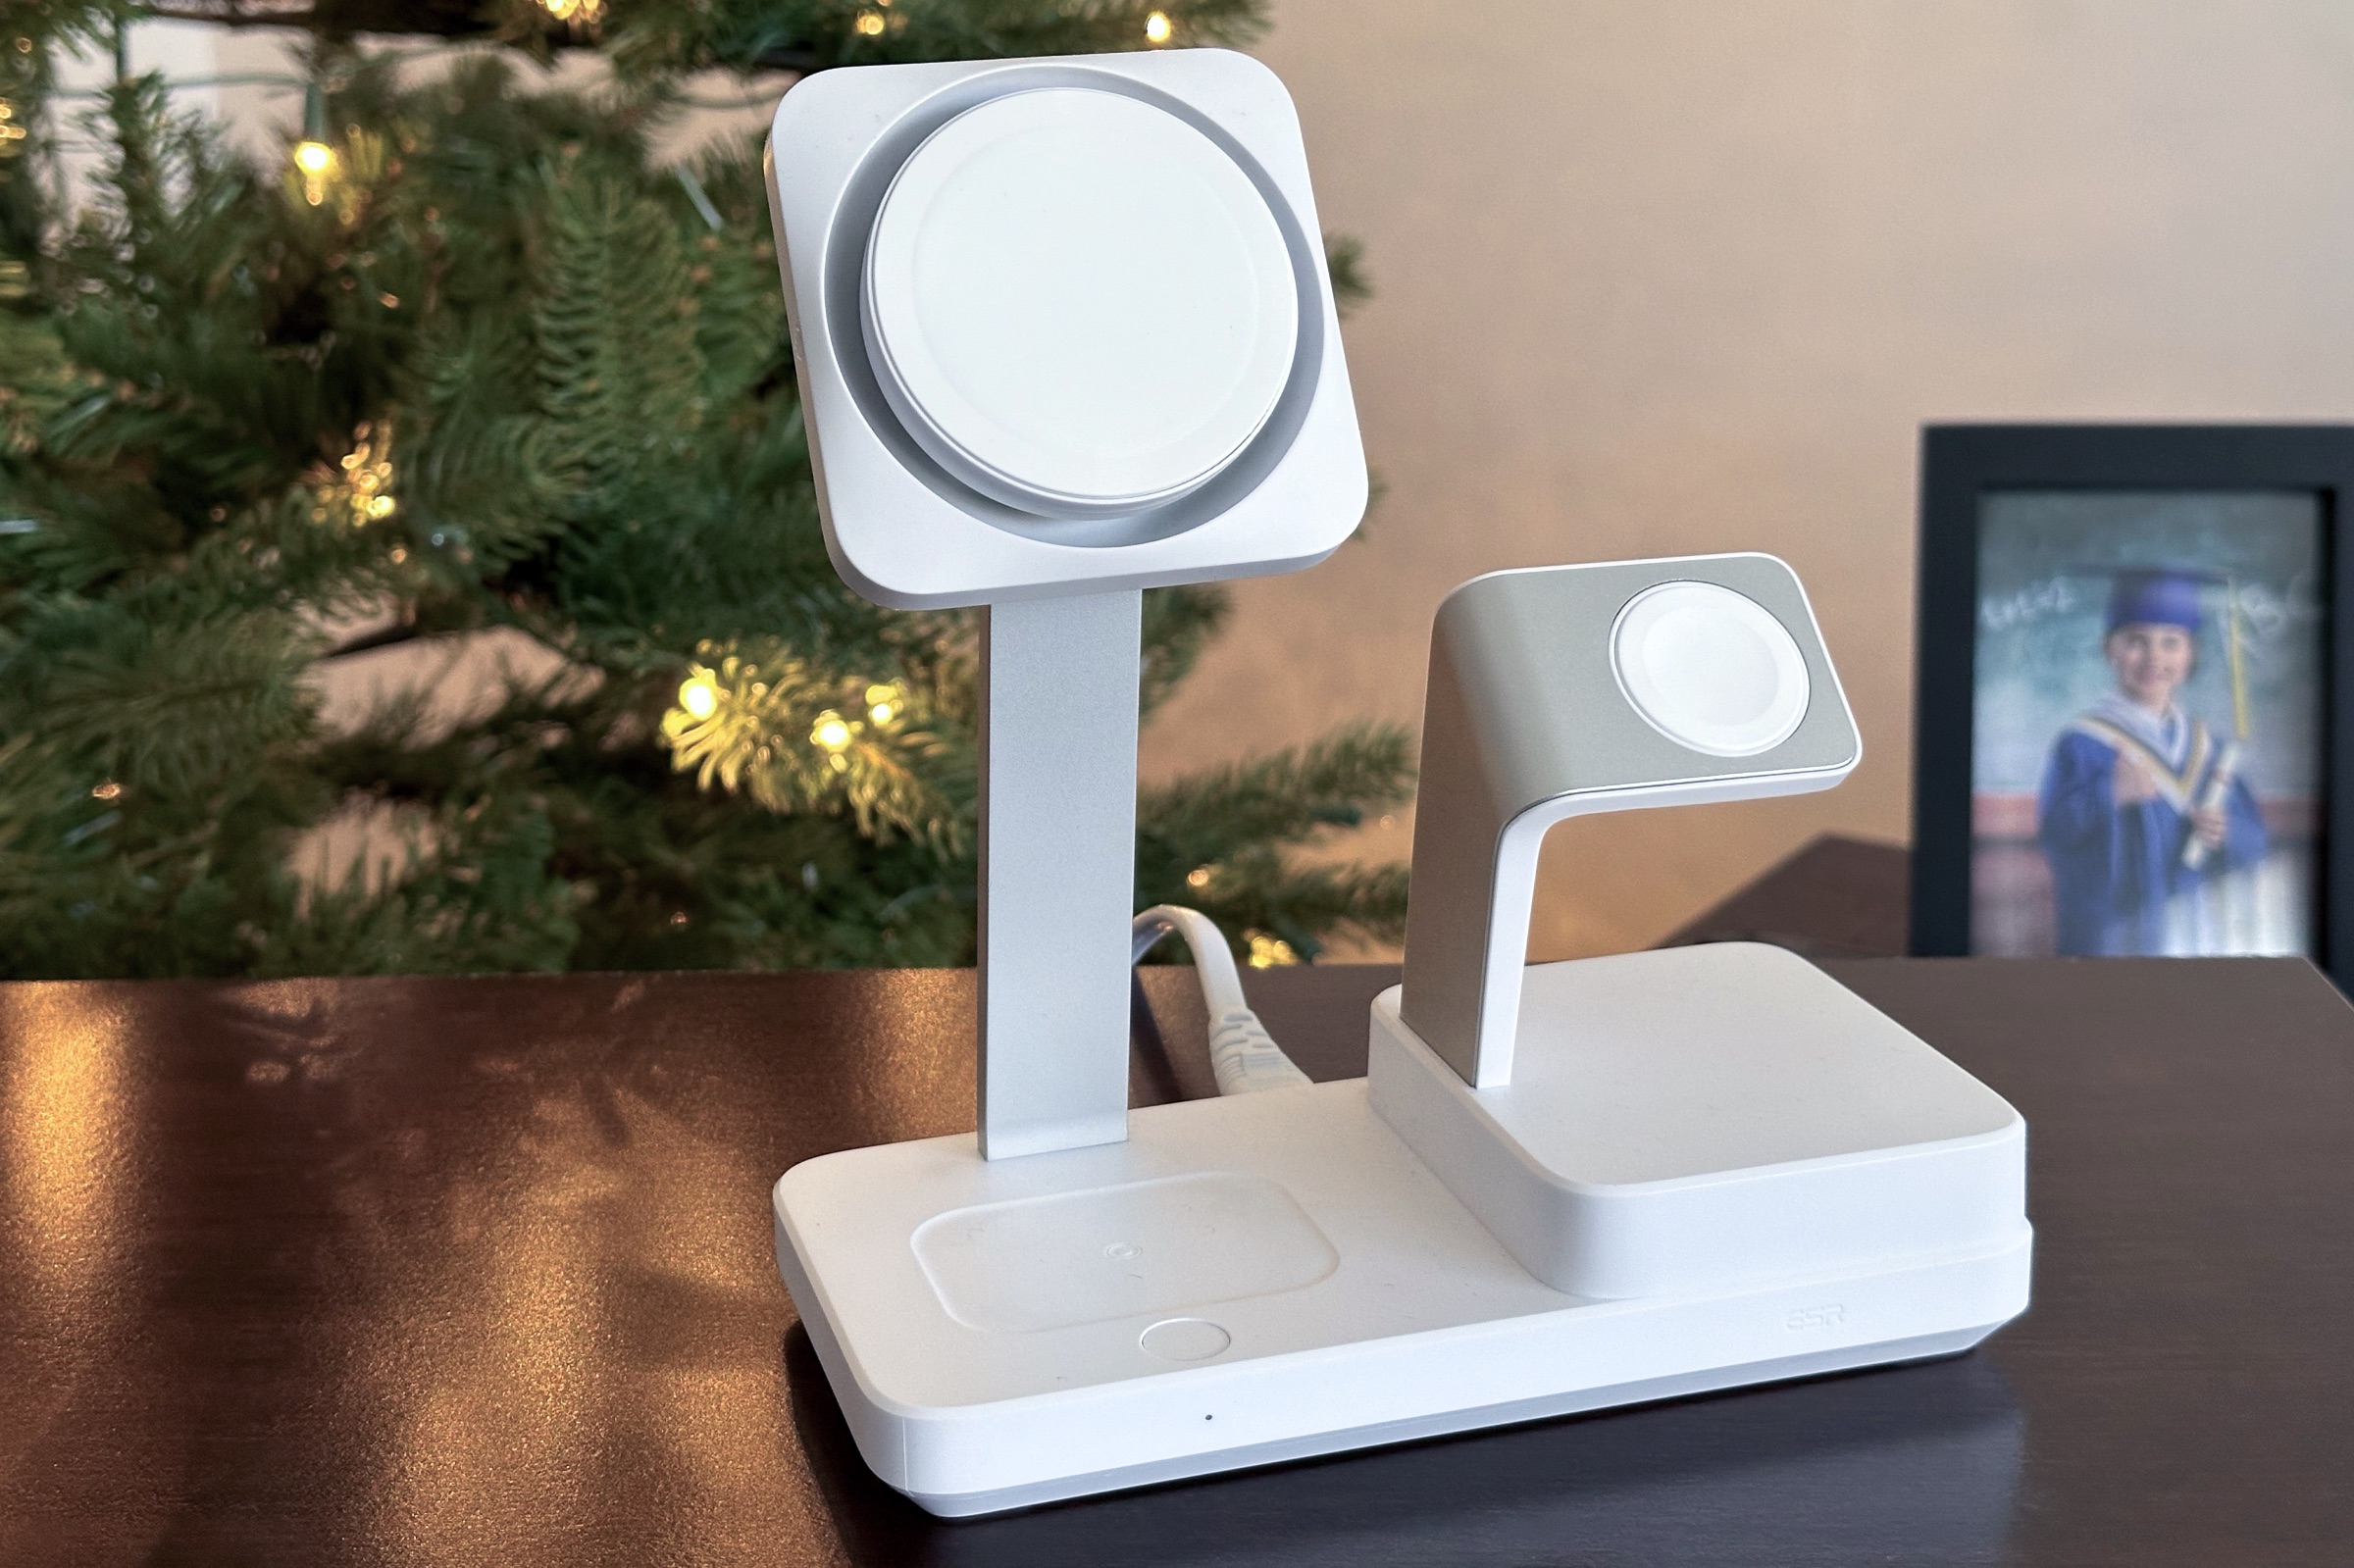 ESR's 6-in-1 charging stand on table in front of a Christmas tree.